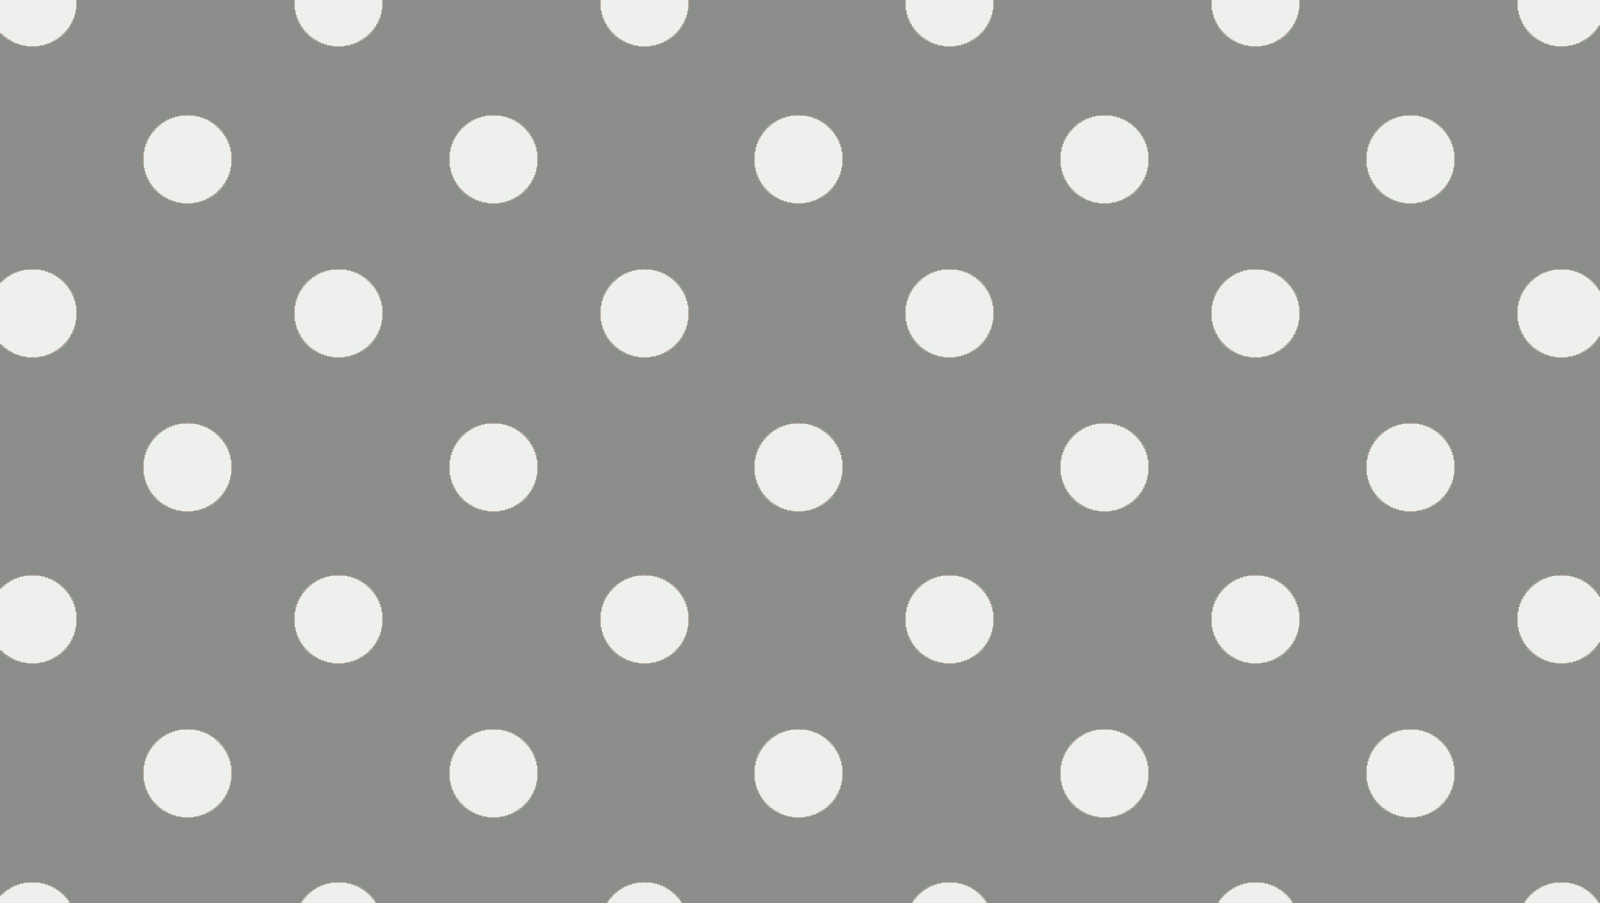 Image gallery for : gray and white polka dot wallpaper